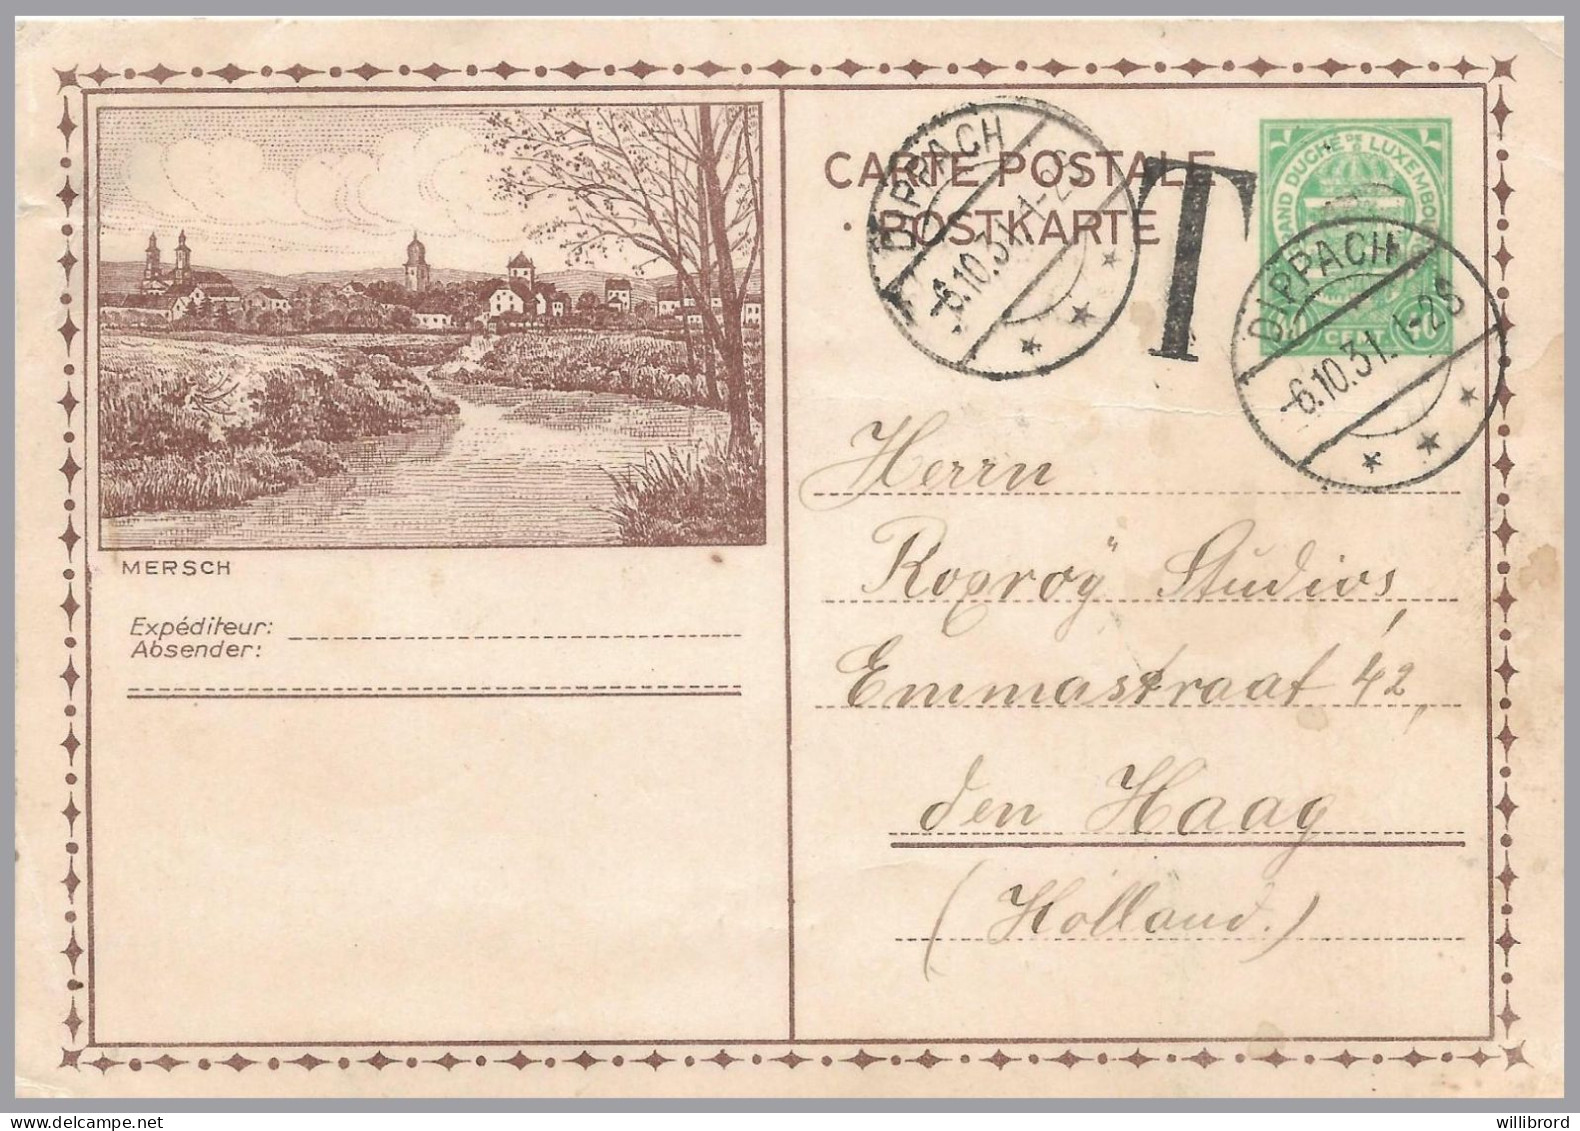 LUXEMBOURG - DIPPACH T-34 1931 - MERSCH View Arms Postal Stationery - Postage Due To Netherlands - Stamped Stationery